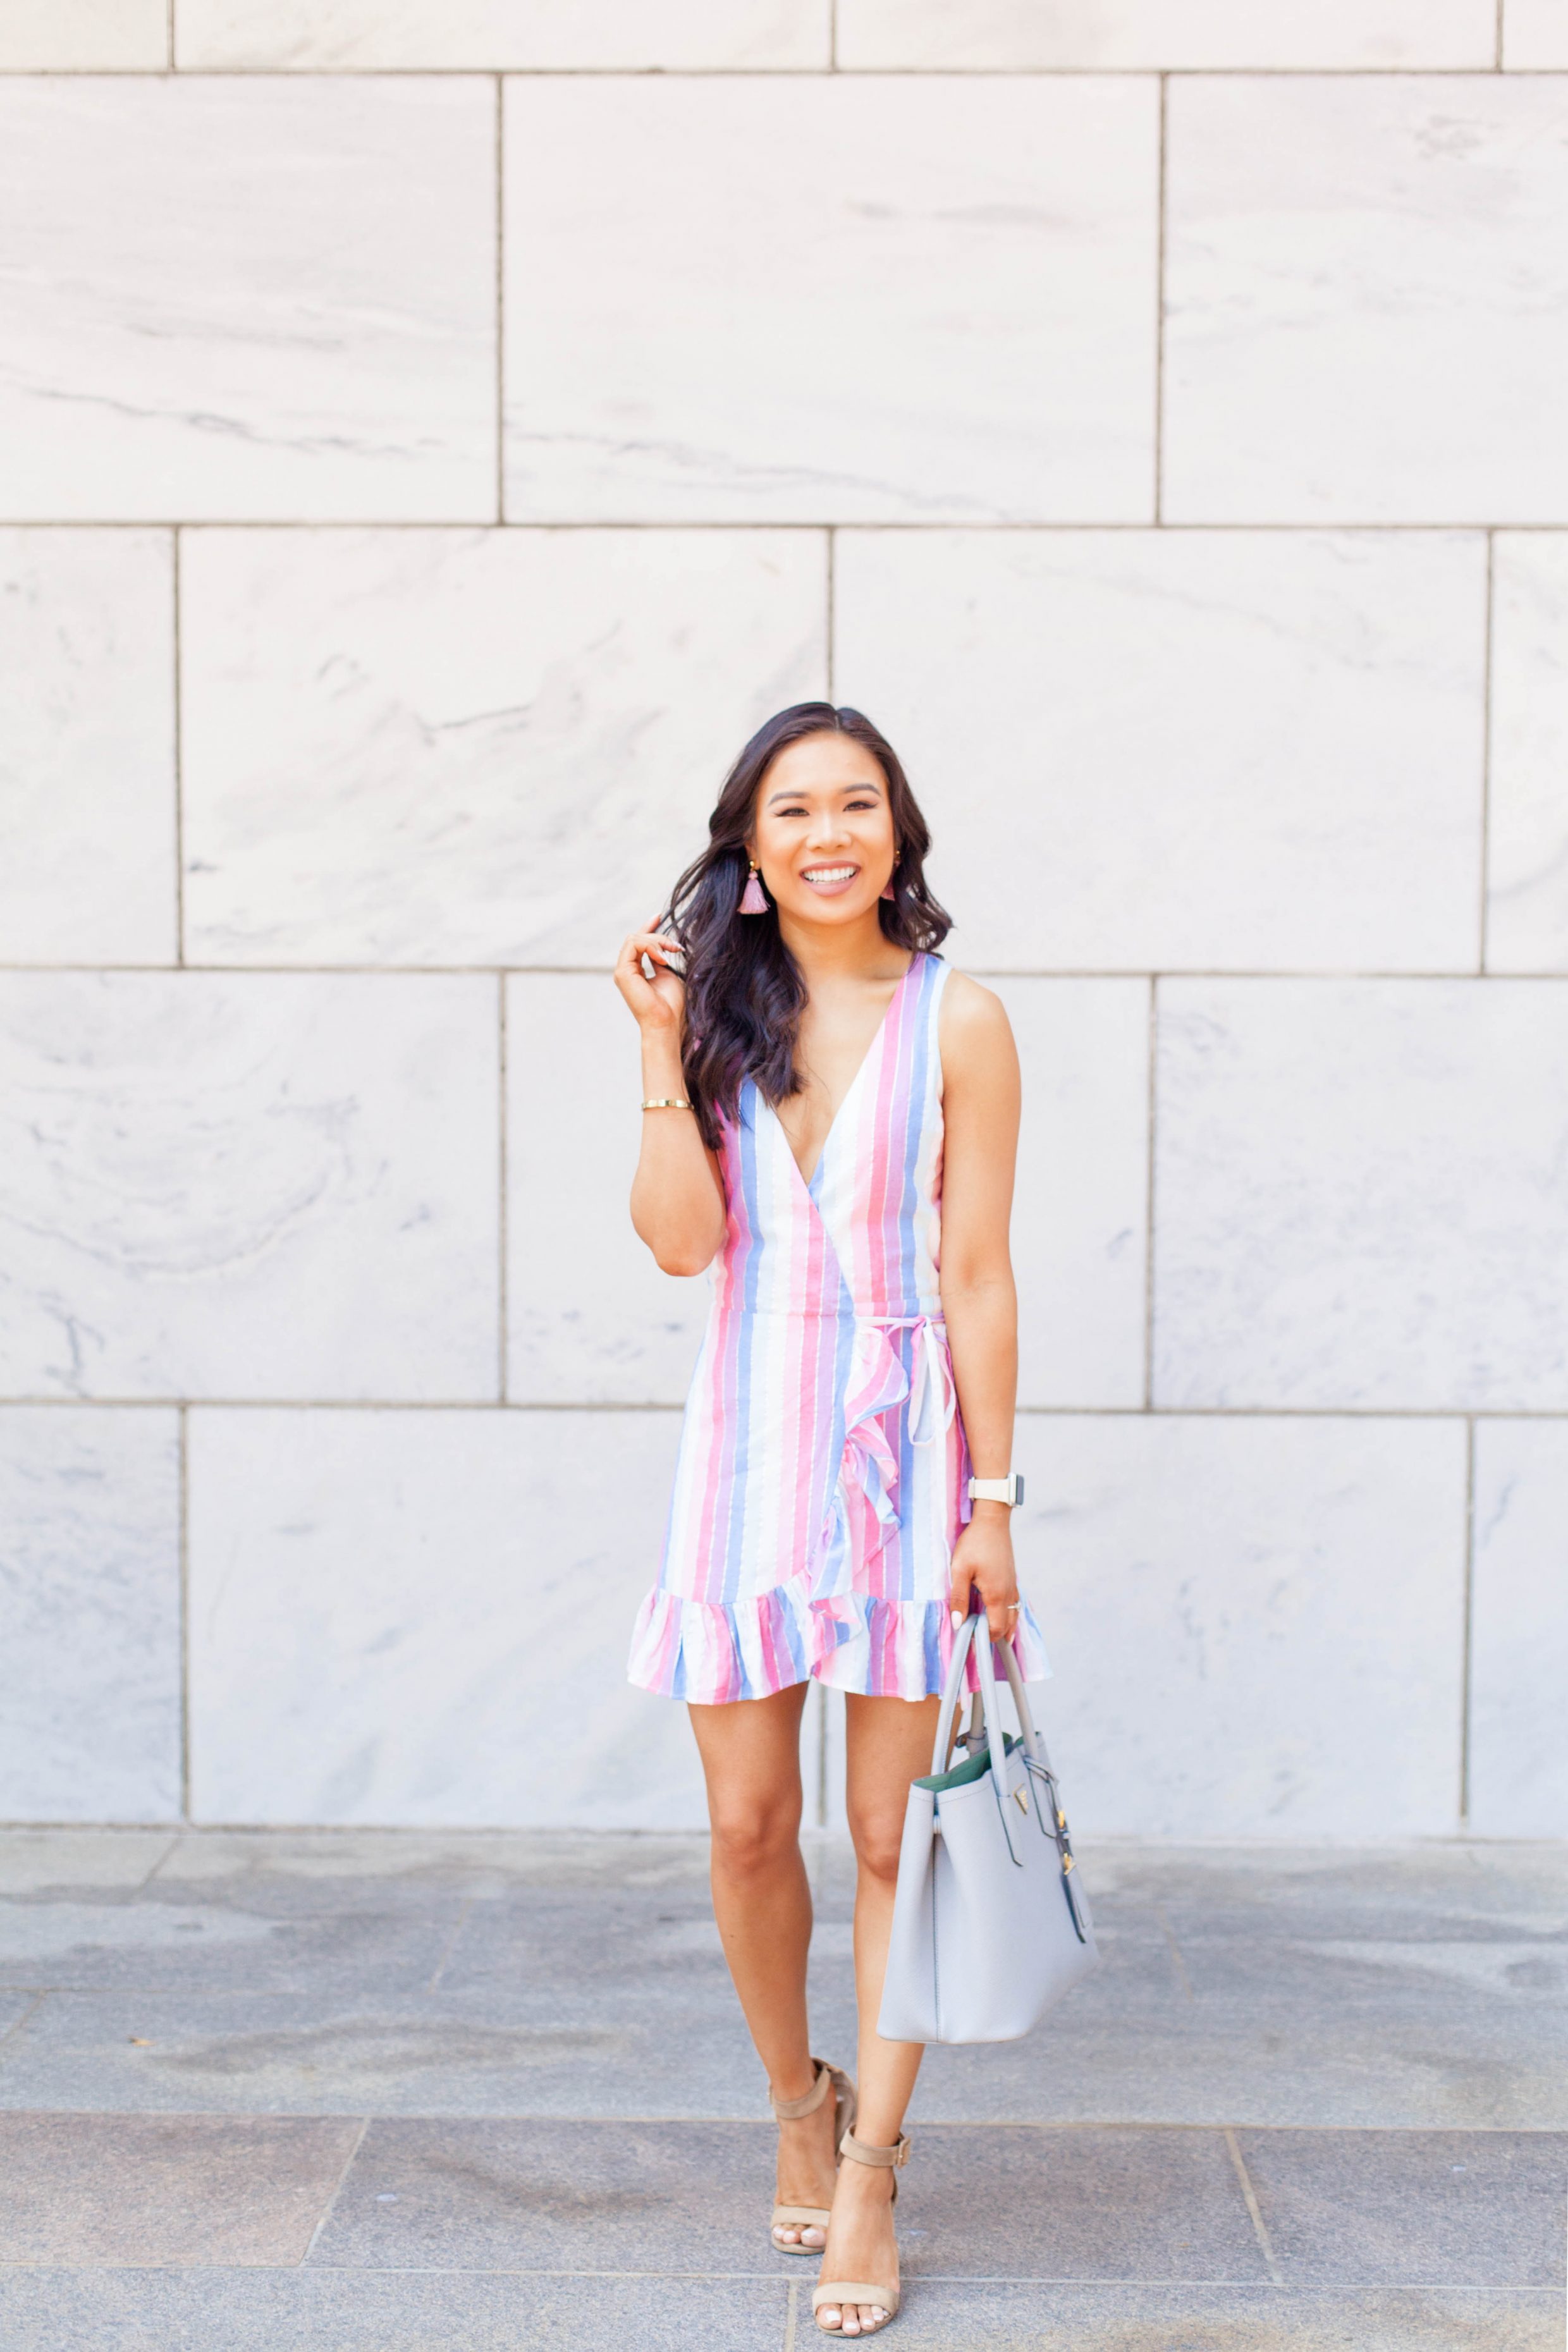 Hoang-Kim wears a pastel striped dress for summer